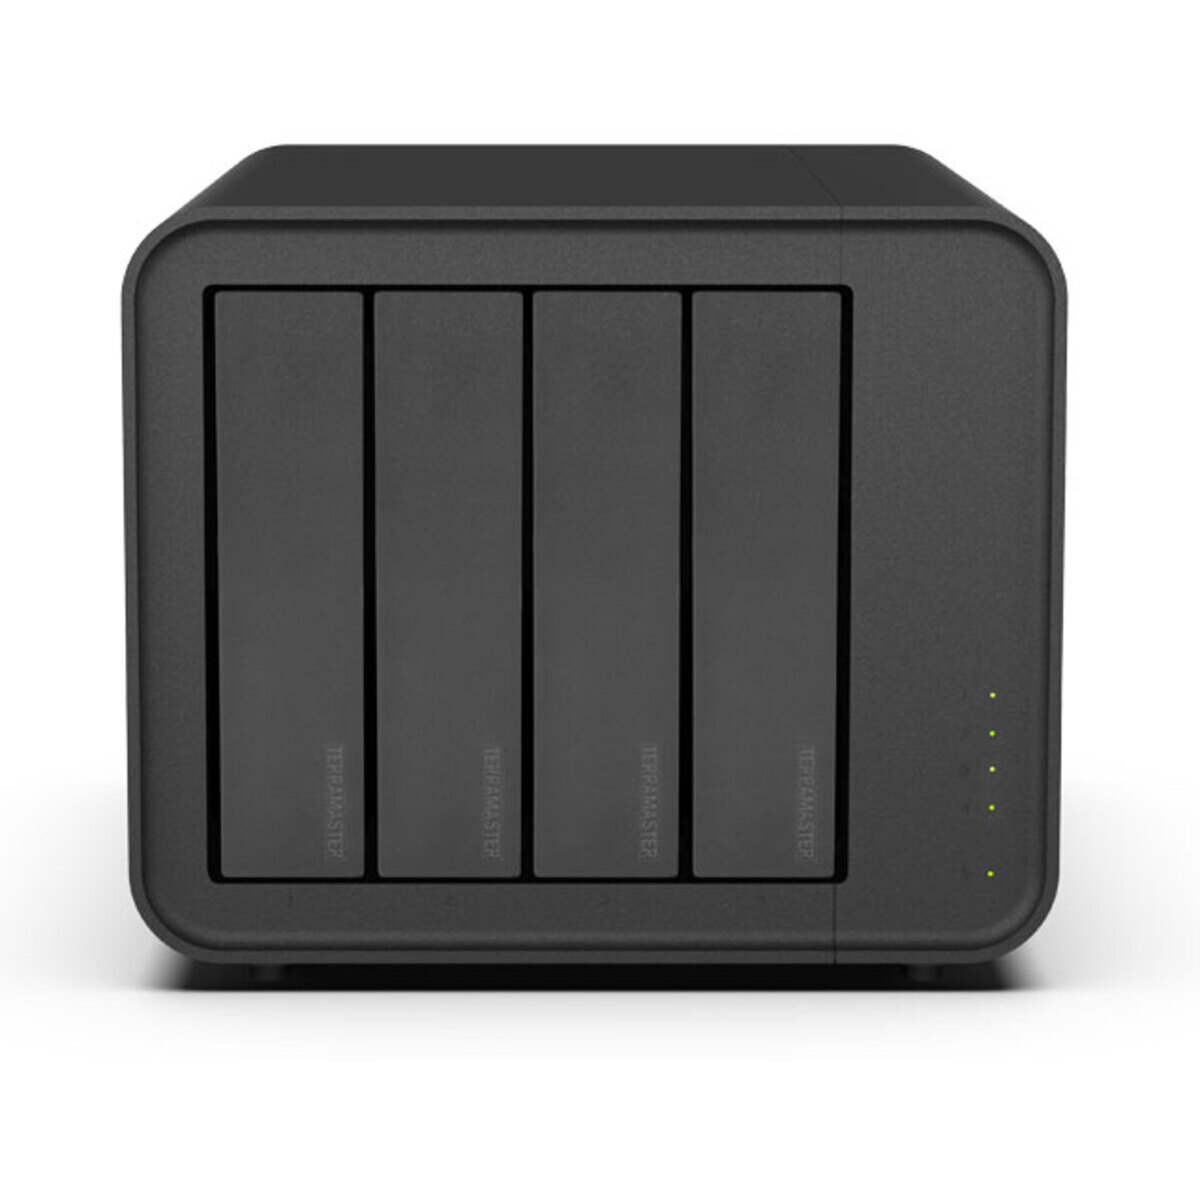 TerraMaster F4-212 24tb 4-Bay Desktop Personal / Basic Home / Small Office NAS - Network Attached Storage Device 2x12tb Western Digital Ultrastar DC HC520 HUH721212ALE600 3.5 7200rpm SATA 6Gb/s HDD ENTERPRISE Class Drives Installed - Burn-In Tested F4-212